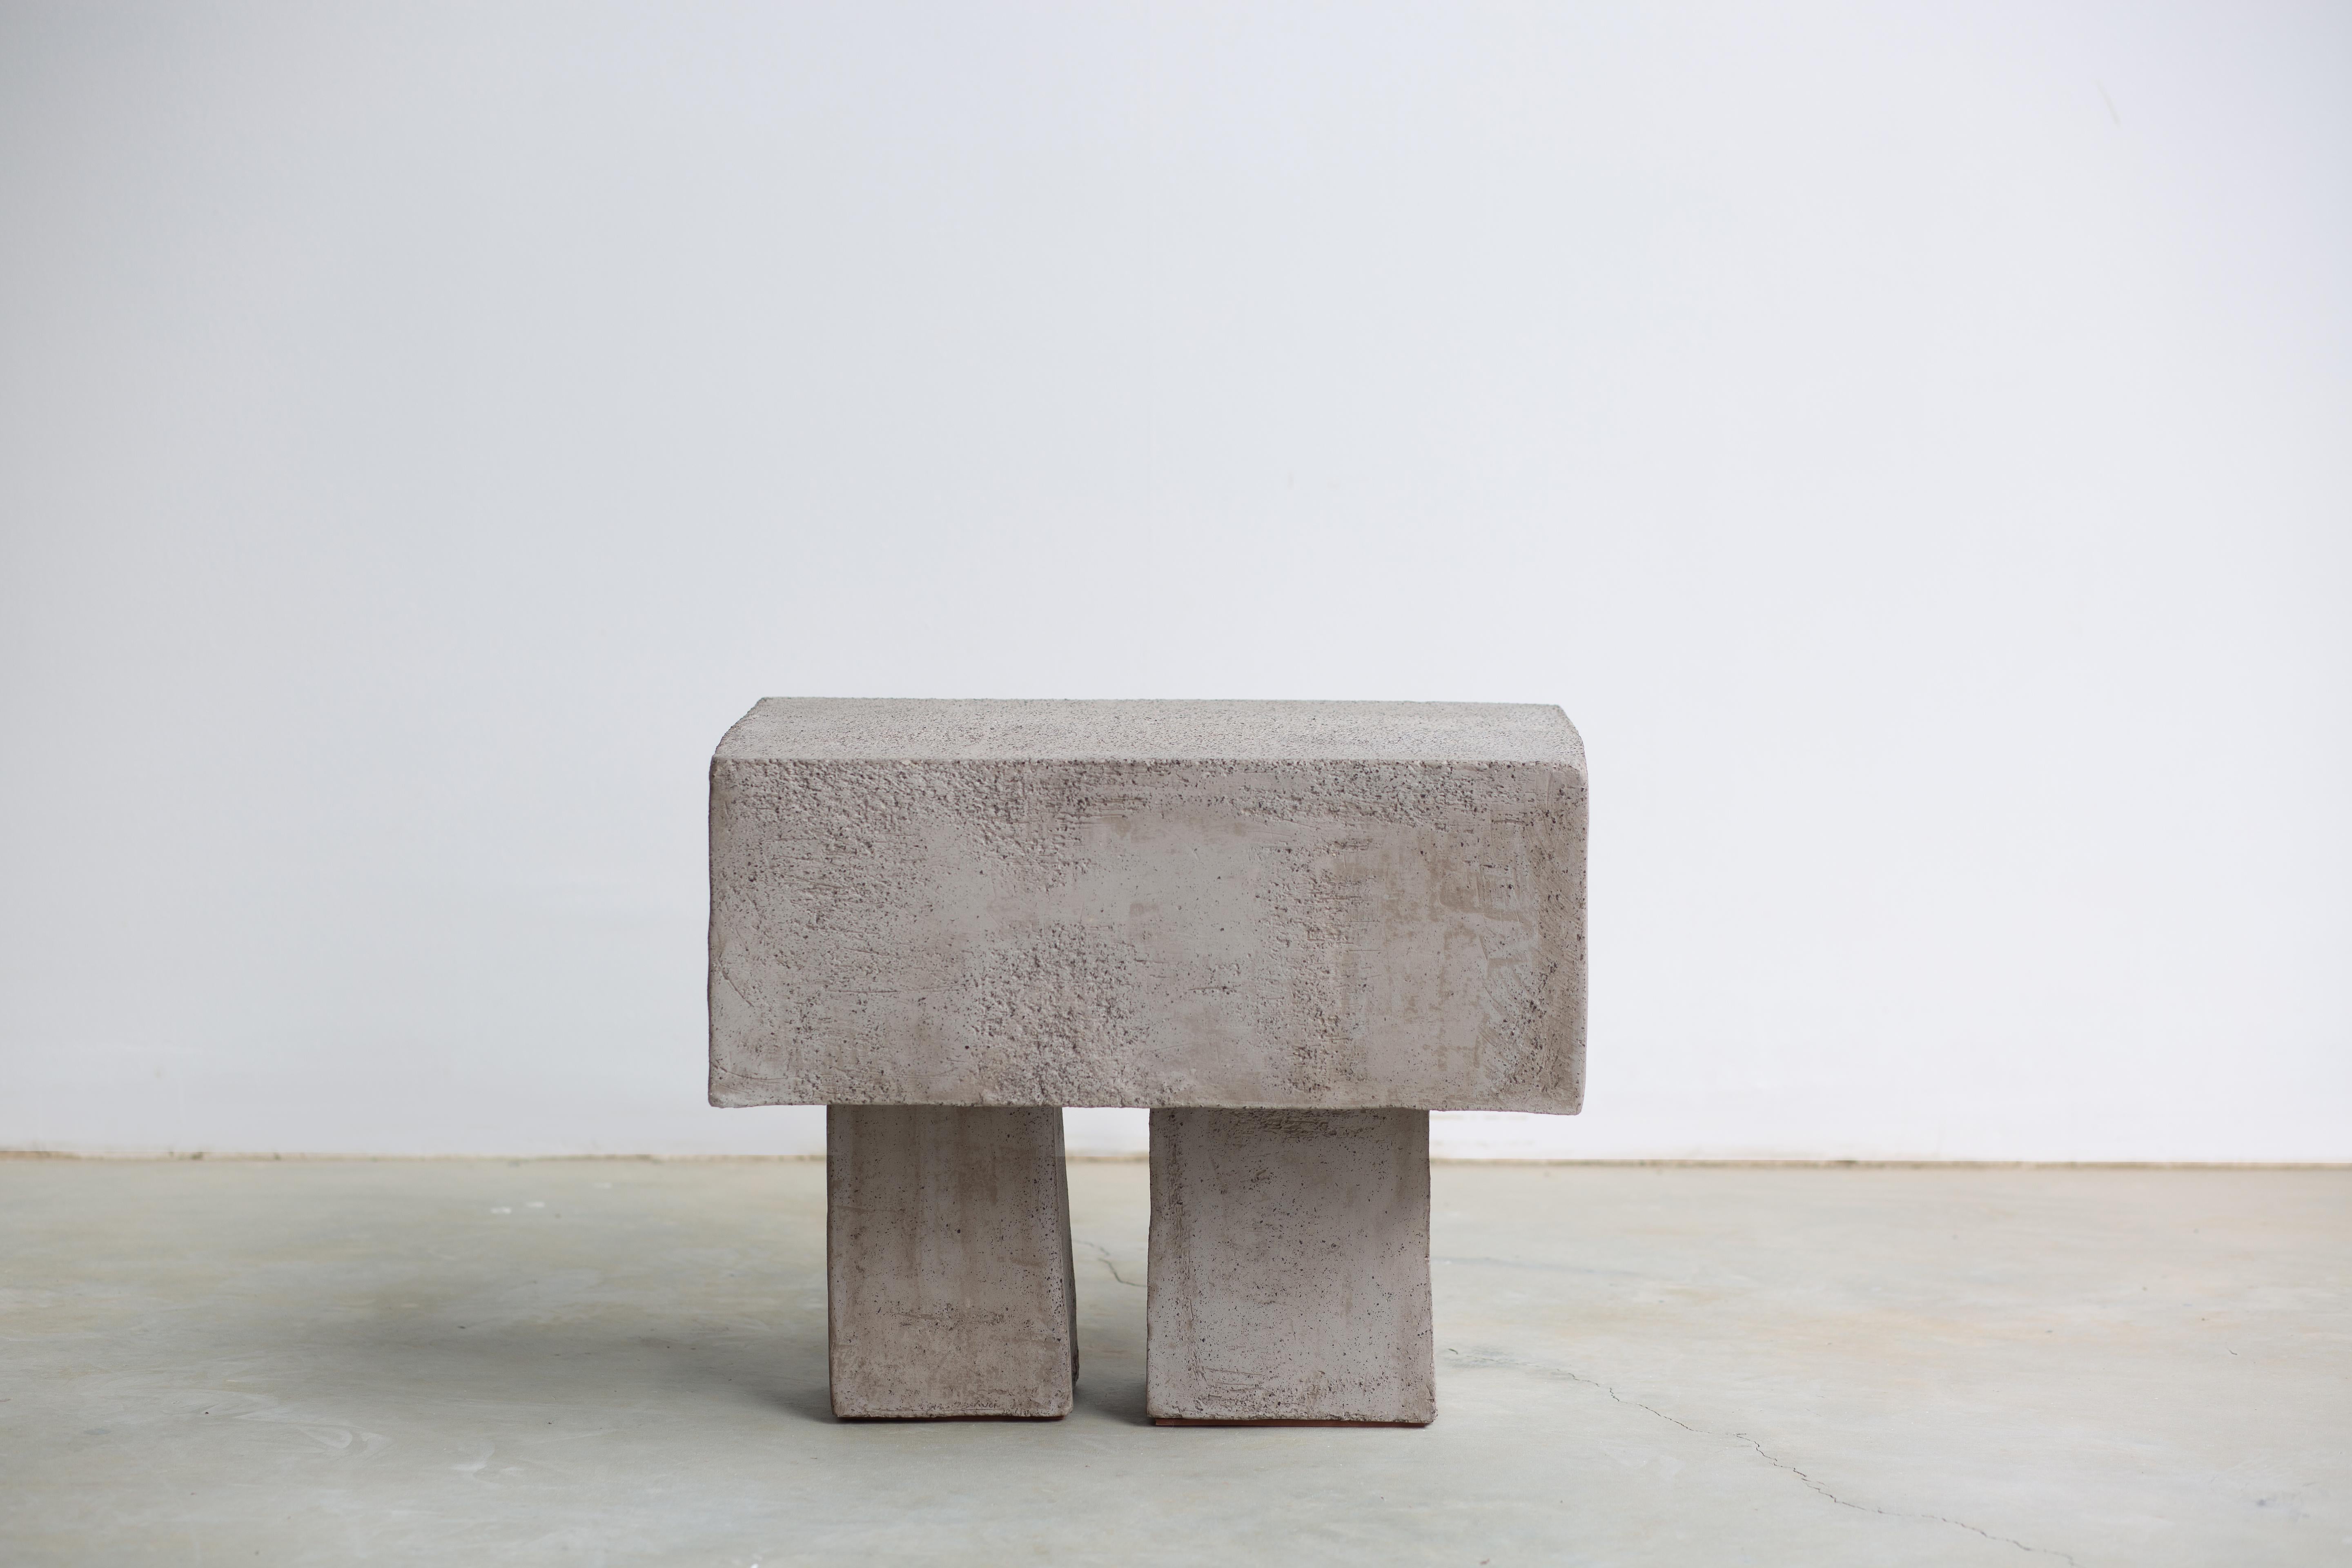 Rudis Stool by Isin Sezgi Avci
Unique Piece.
Dimensions: D 35 x W 50 x H 43 cm.
Materials: Hand-built ceramic.

The Rudis stool is a piece of ceramic furniture. The clay material is used to its limits to create a sculptural expression with the